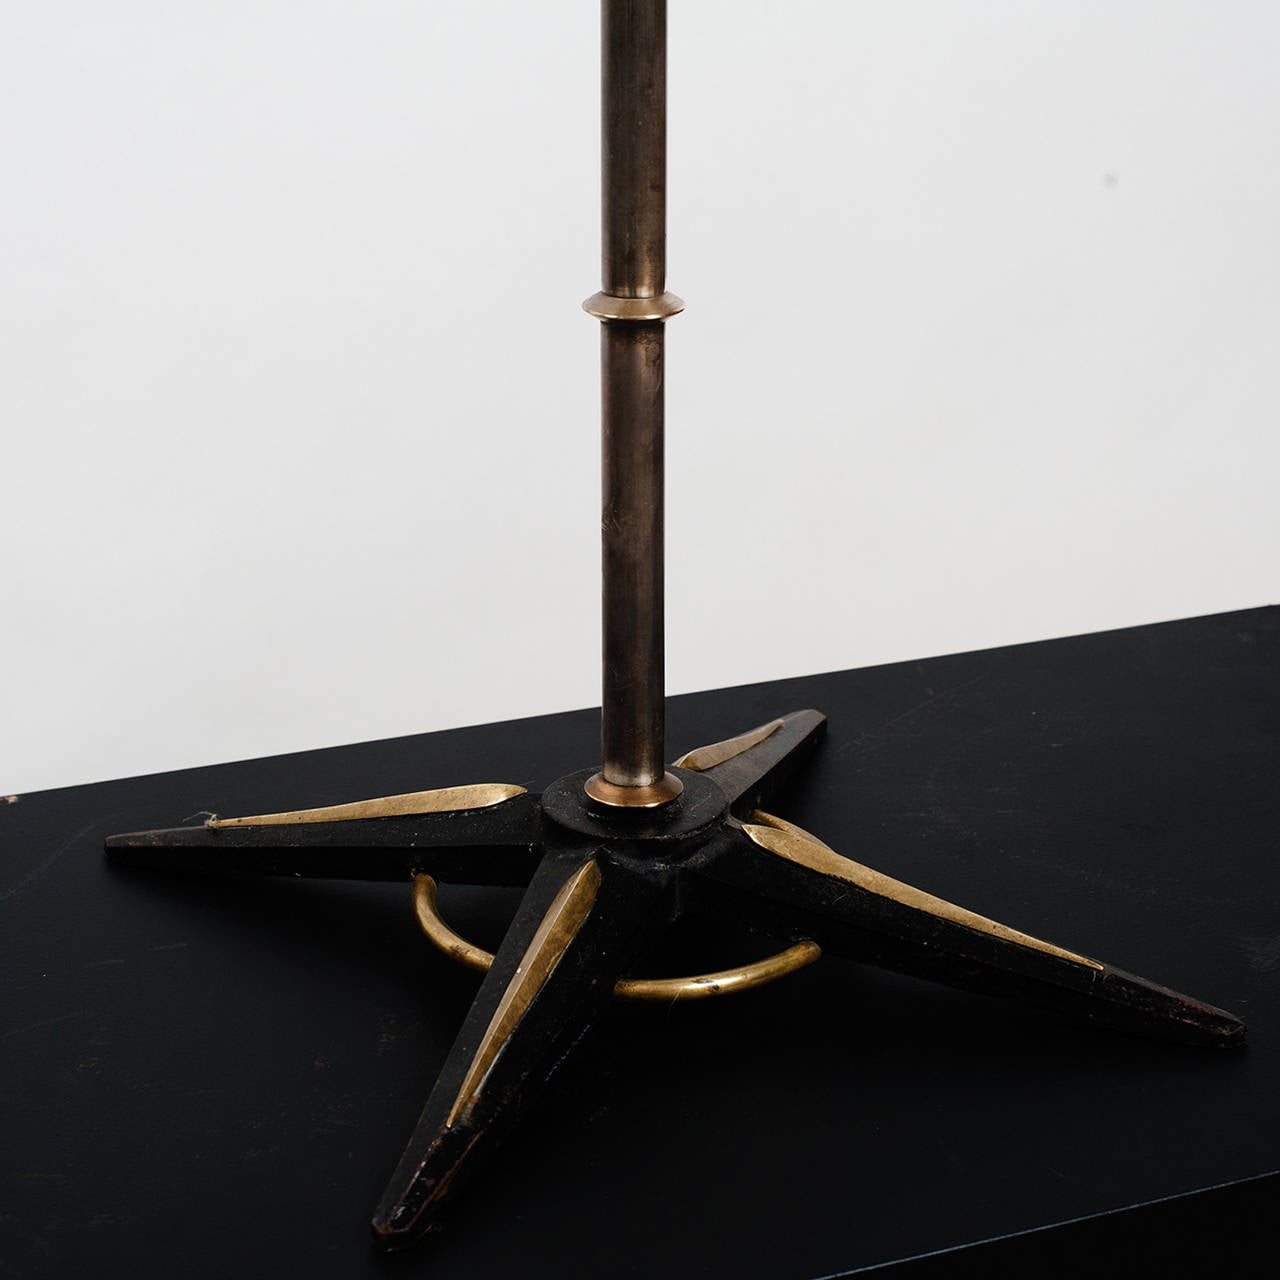 Jacques Adnet style lamp made of iron and gold metal, France, 20th century.